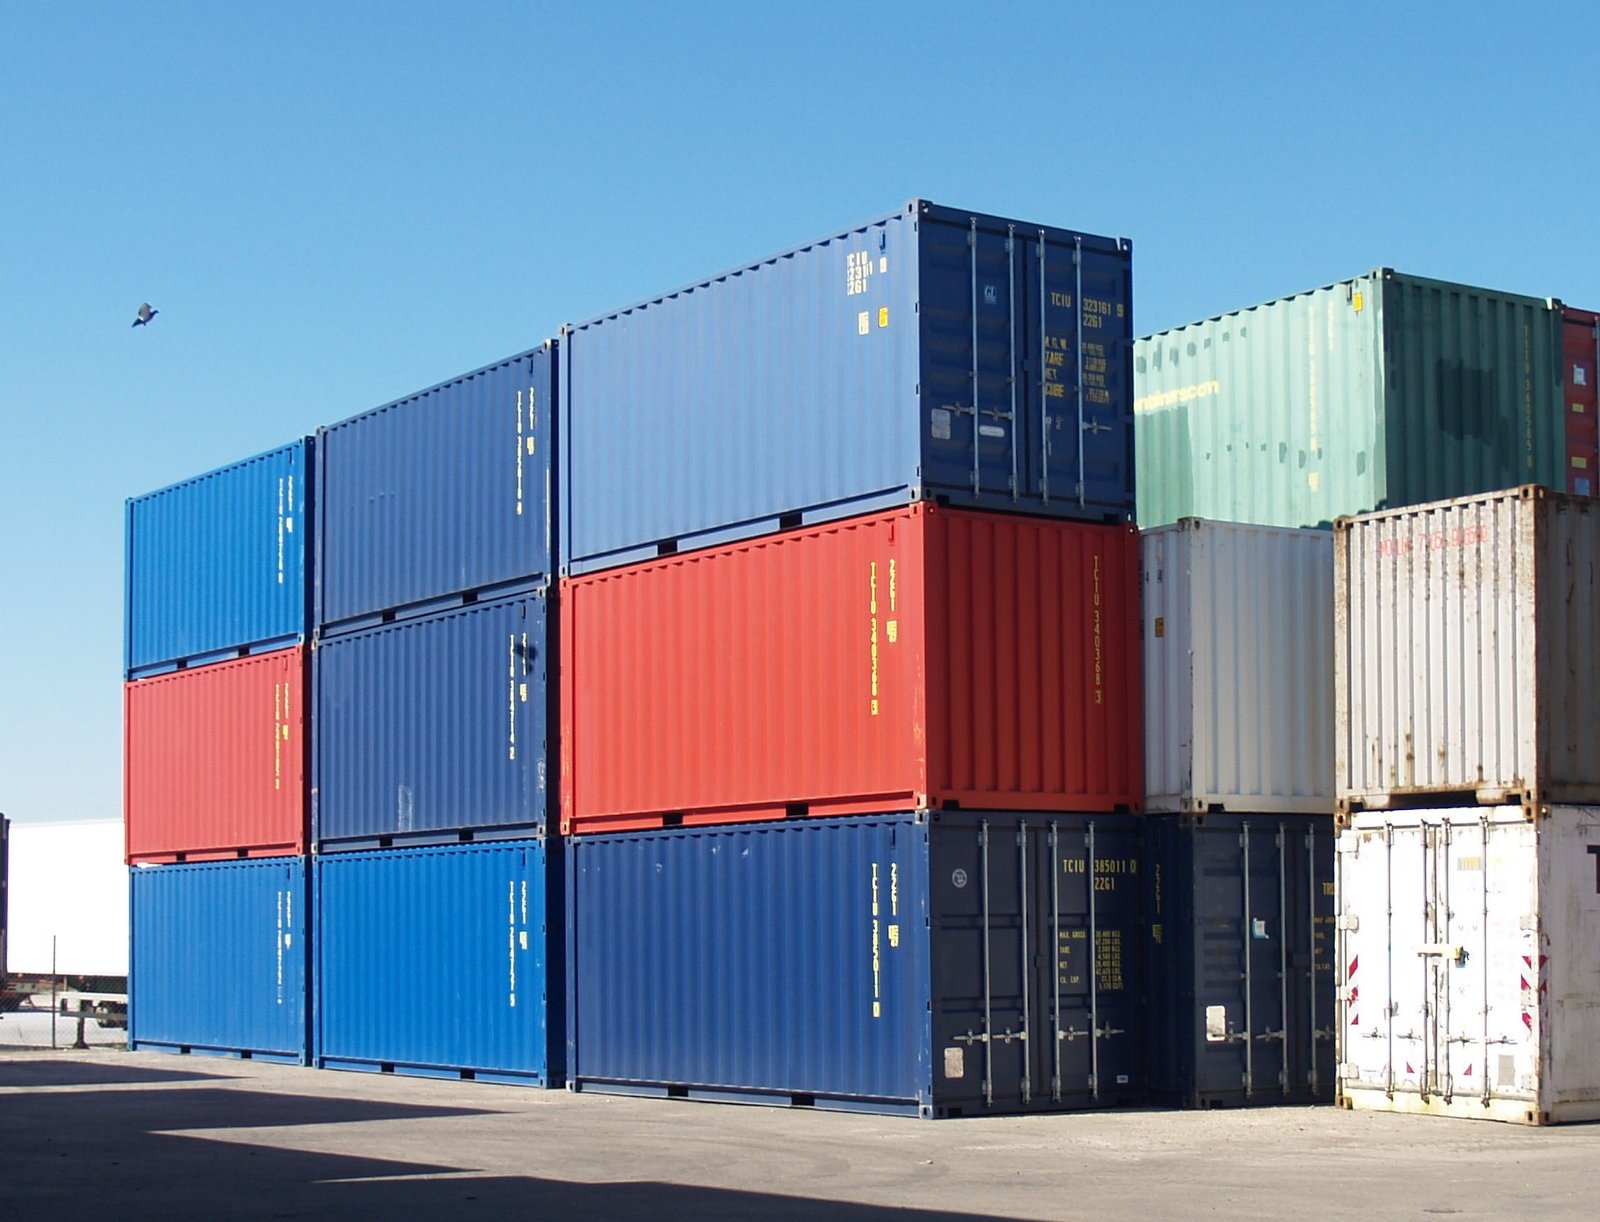 What Makes Small Shipping Containers for Sale a Smart Investment Choice?